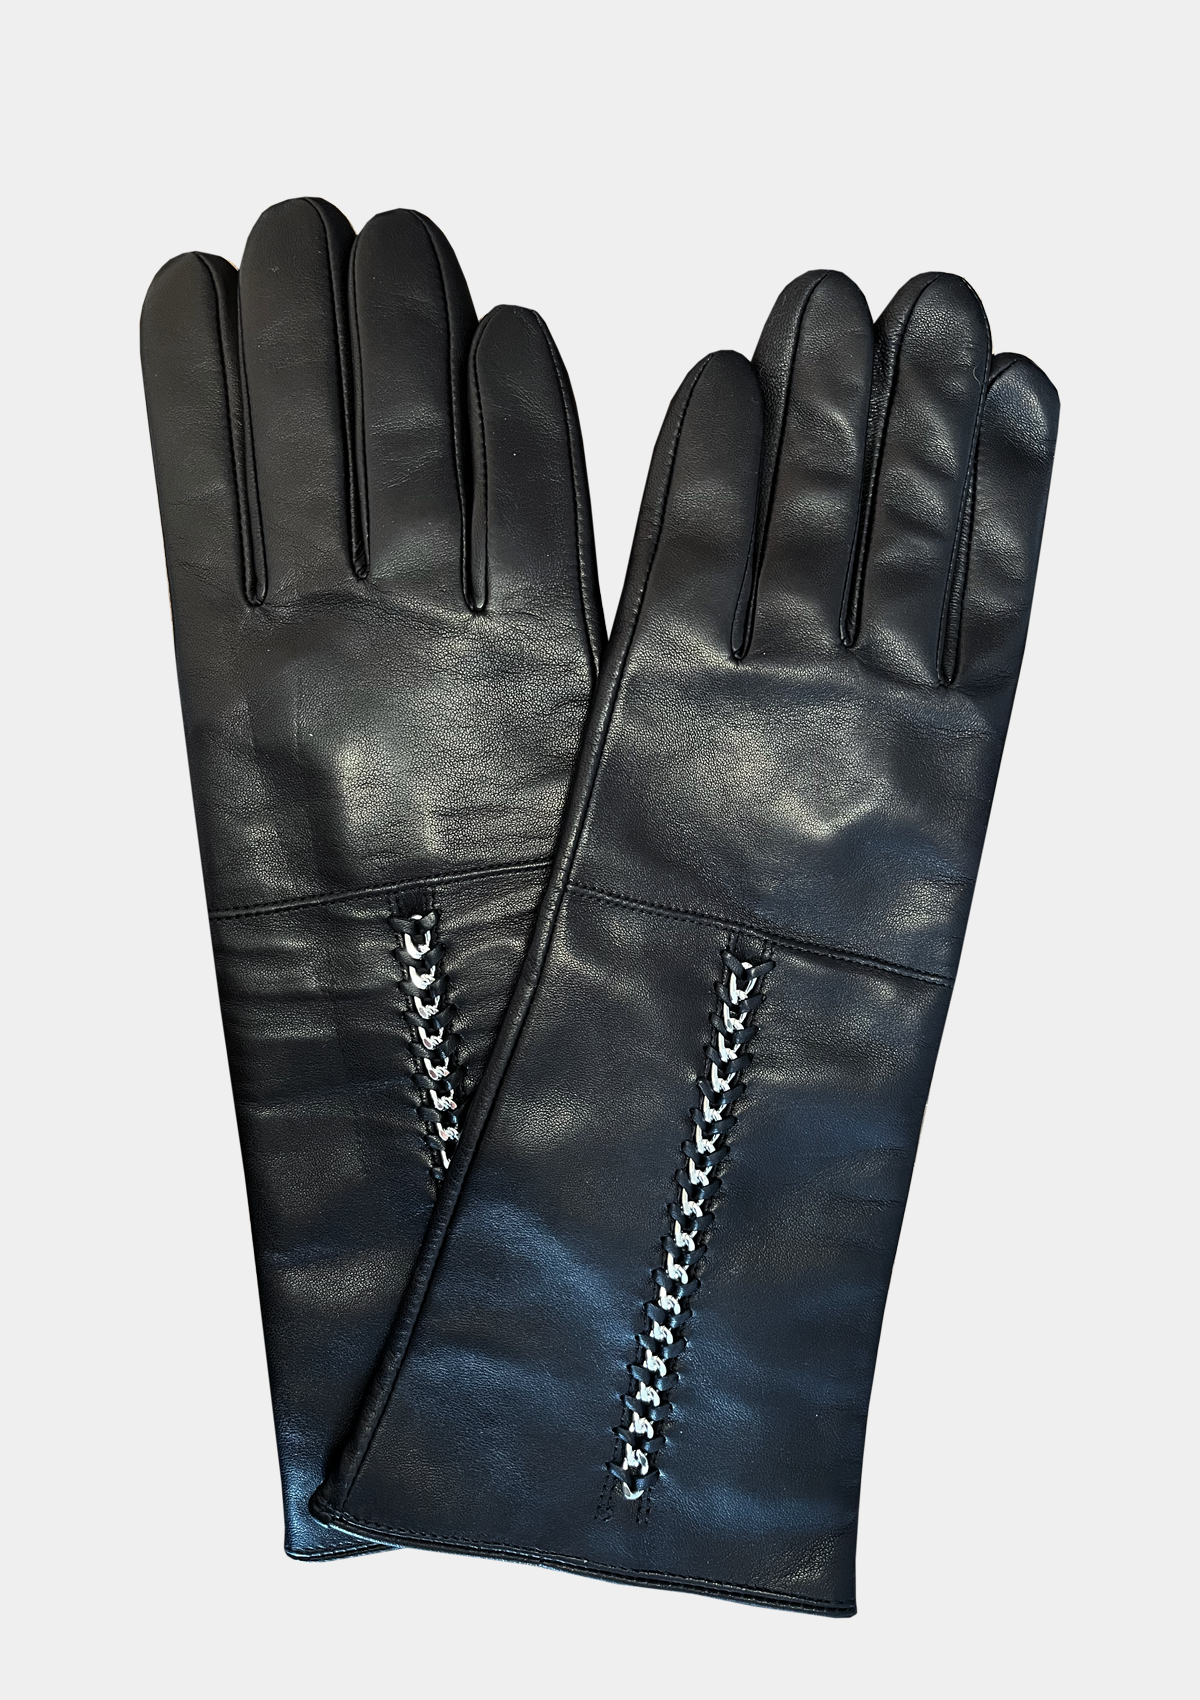 MENS LEATHER AND CHAIN GLOVES